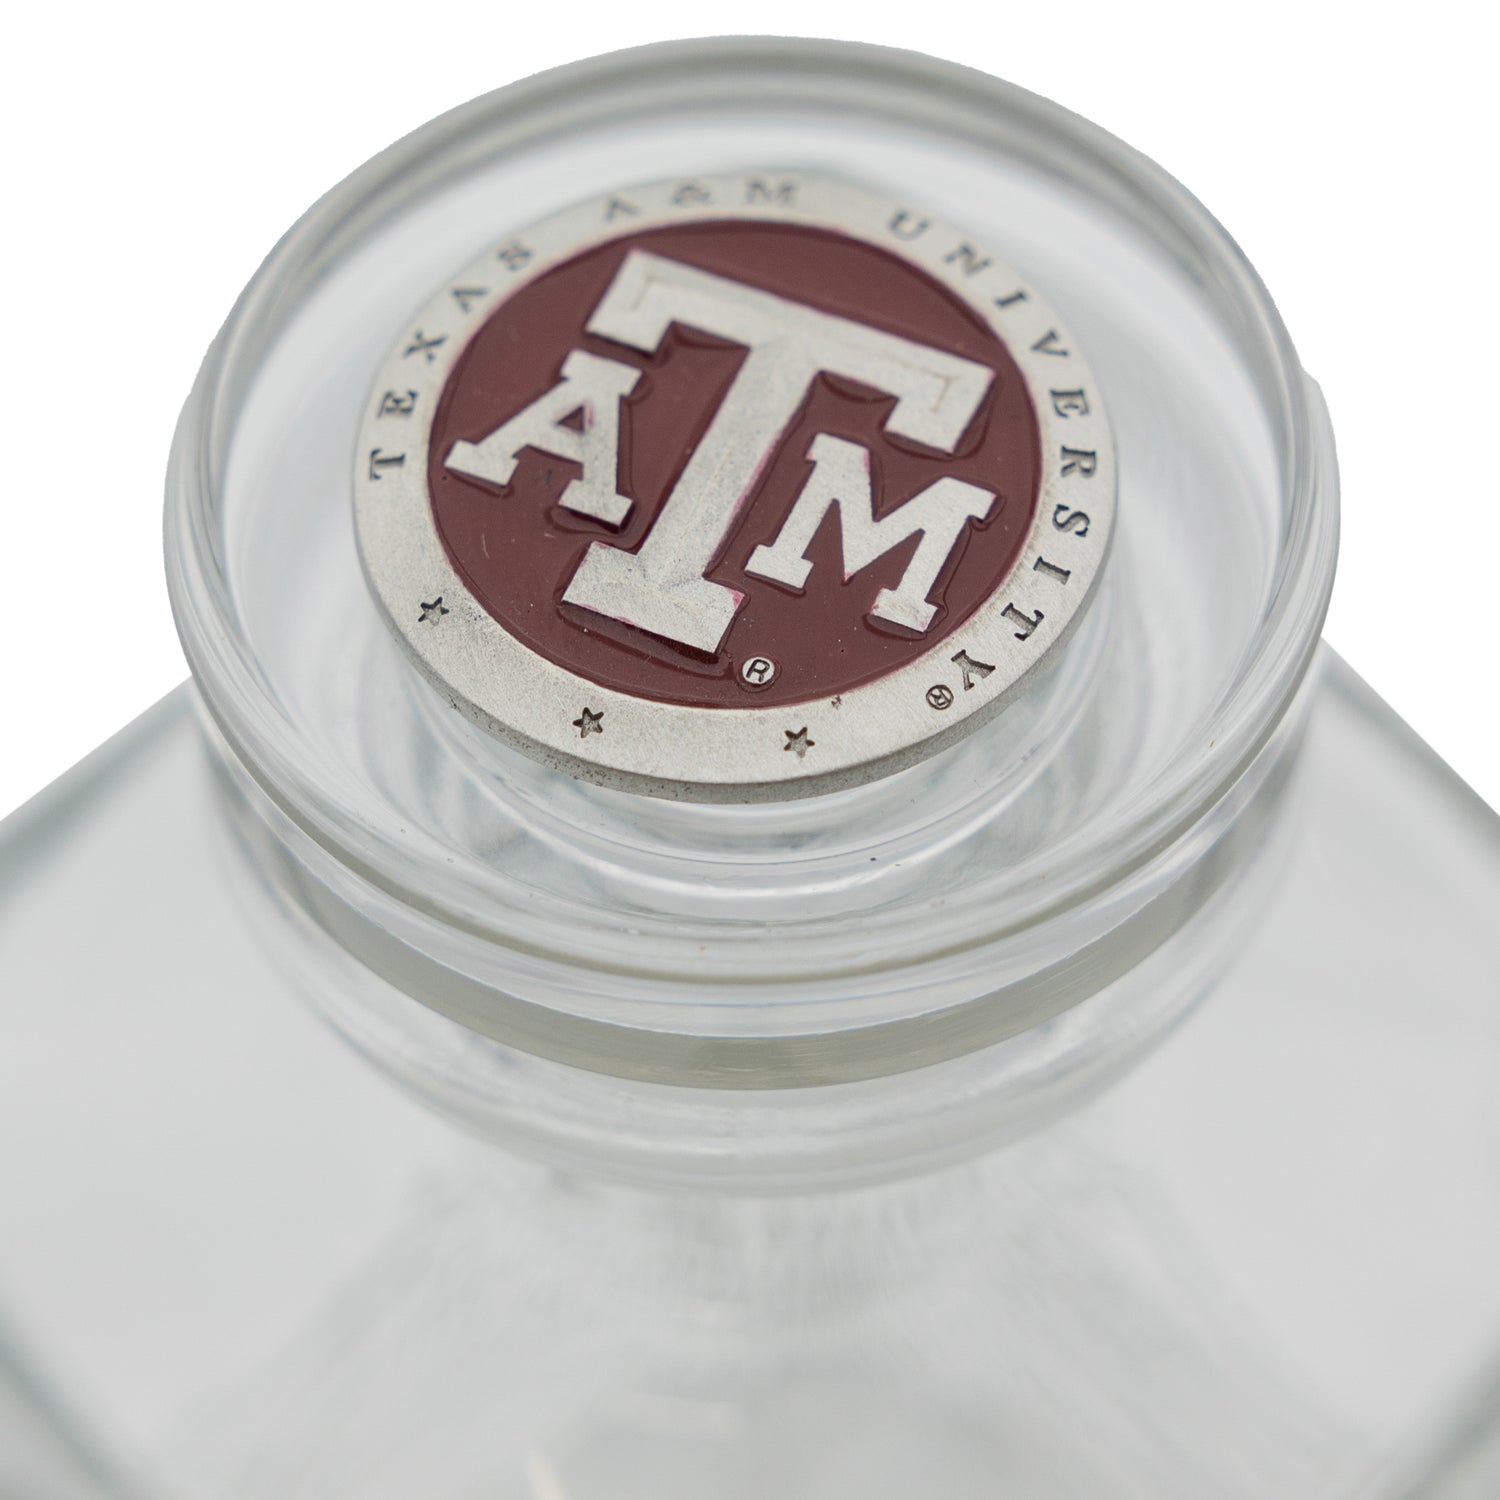 Texas A&M Heritage Decanter